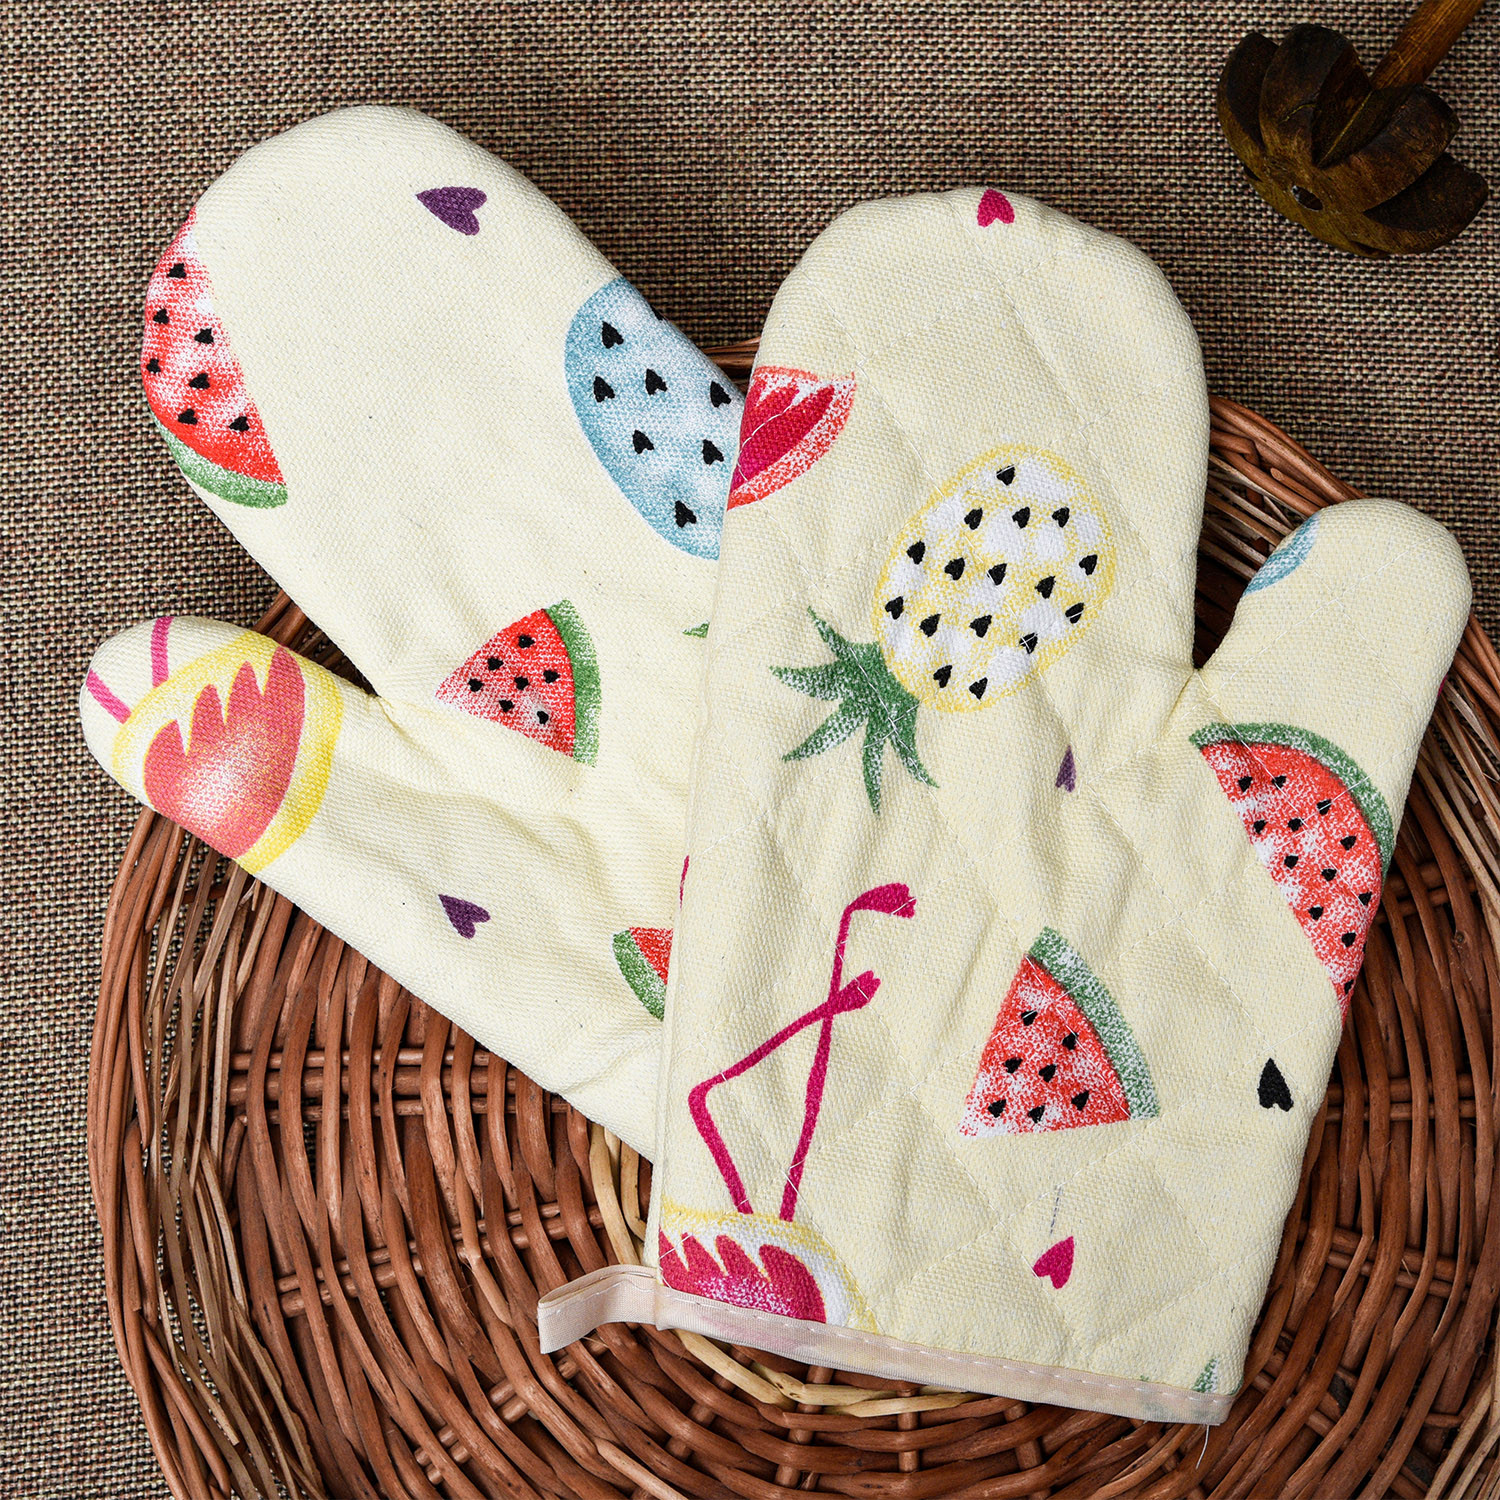 Kuber Industries Oven Mitts|Cotton Microwave Oven Insulated Gloves|Duck Print Hanging Loop Kitchen Oven|Heat Resistant|Microwave Gloves For Kitchen|1 Pair (Cream)